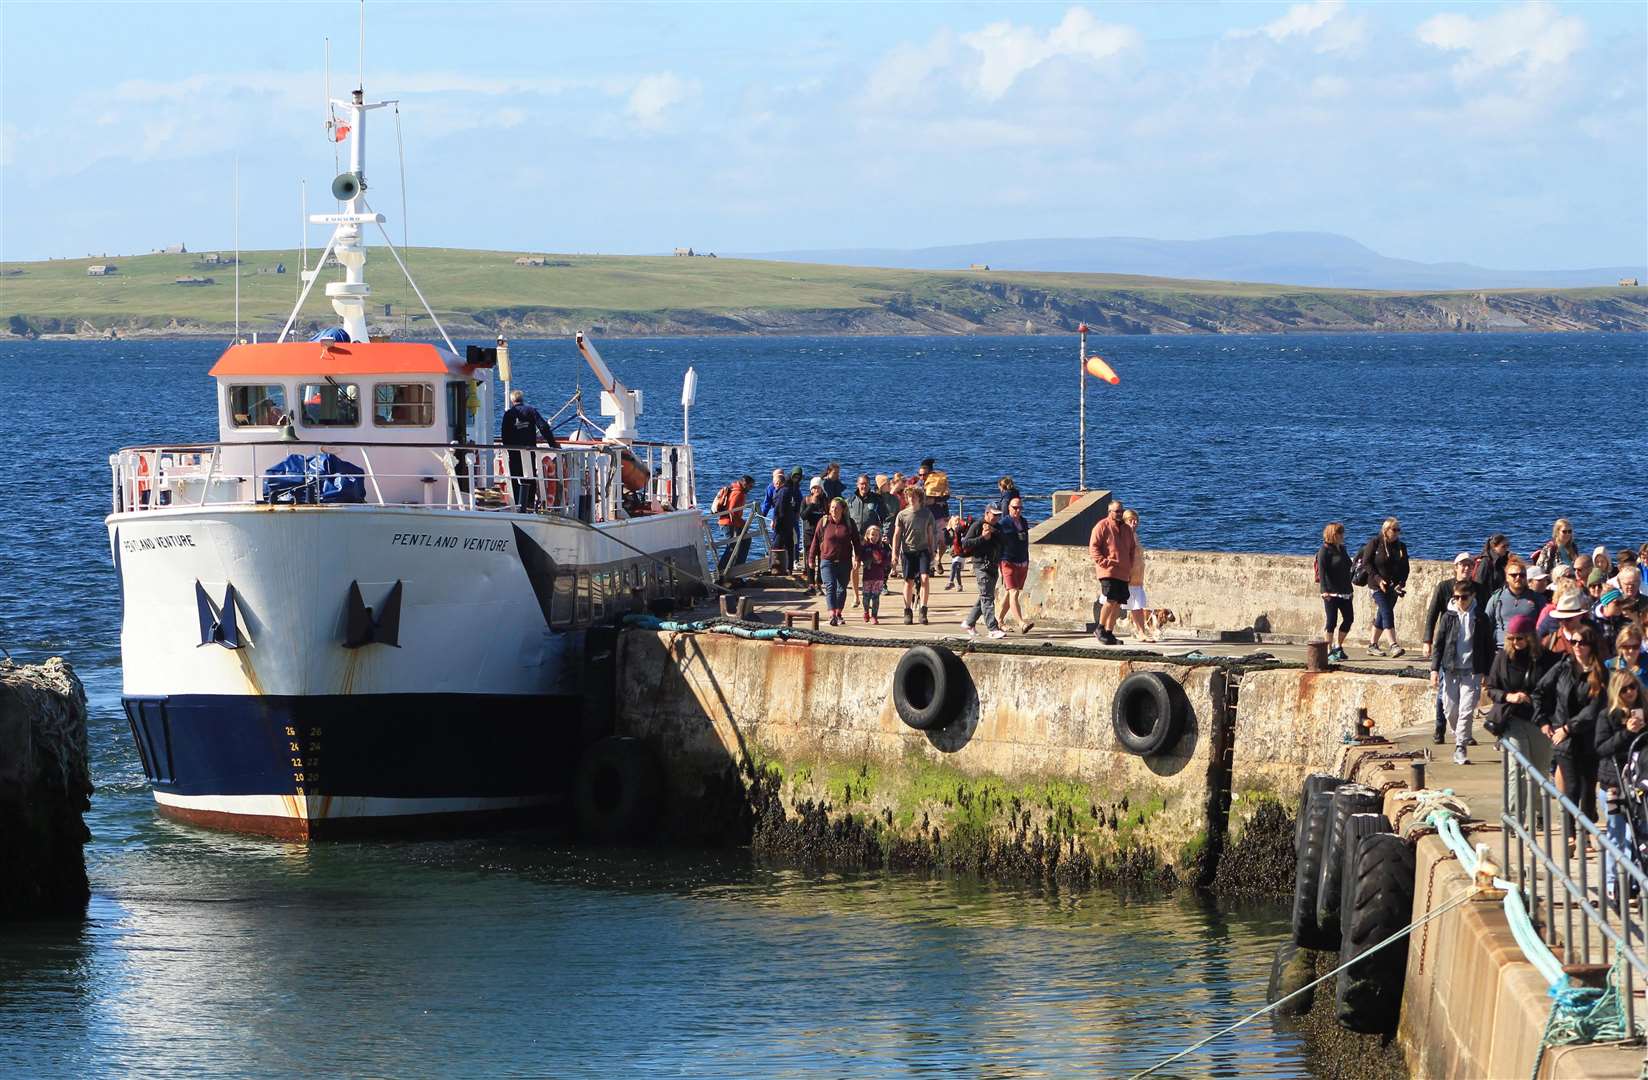 John O’Groats Ferries will again be offering a discount to orca-watchers.